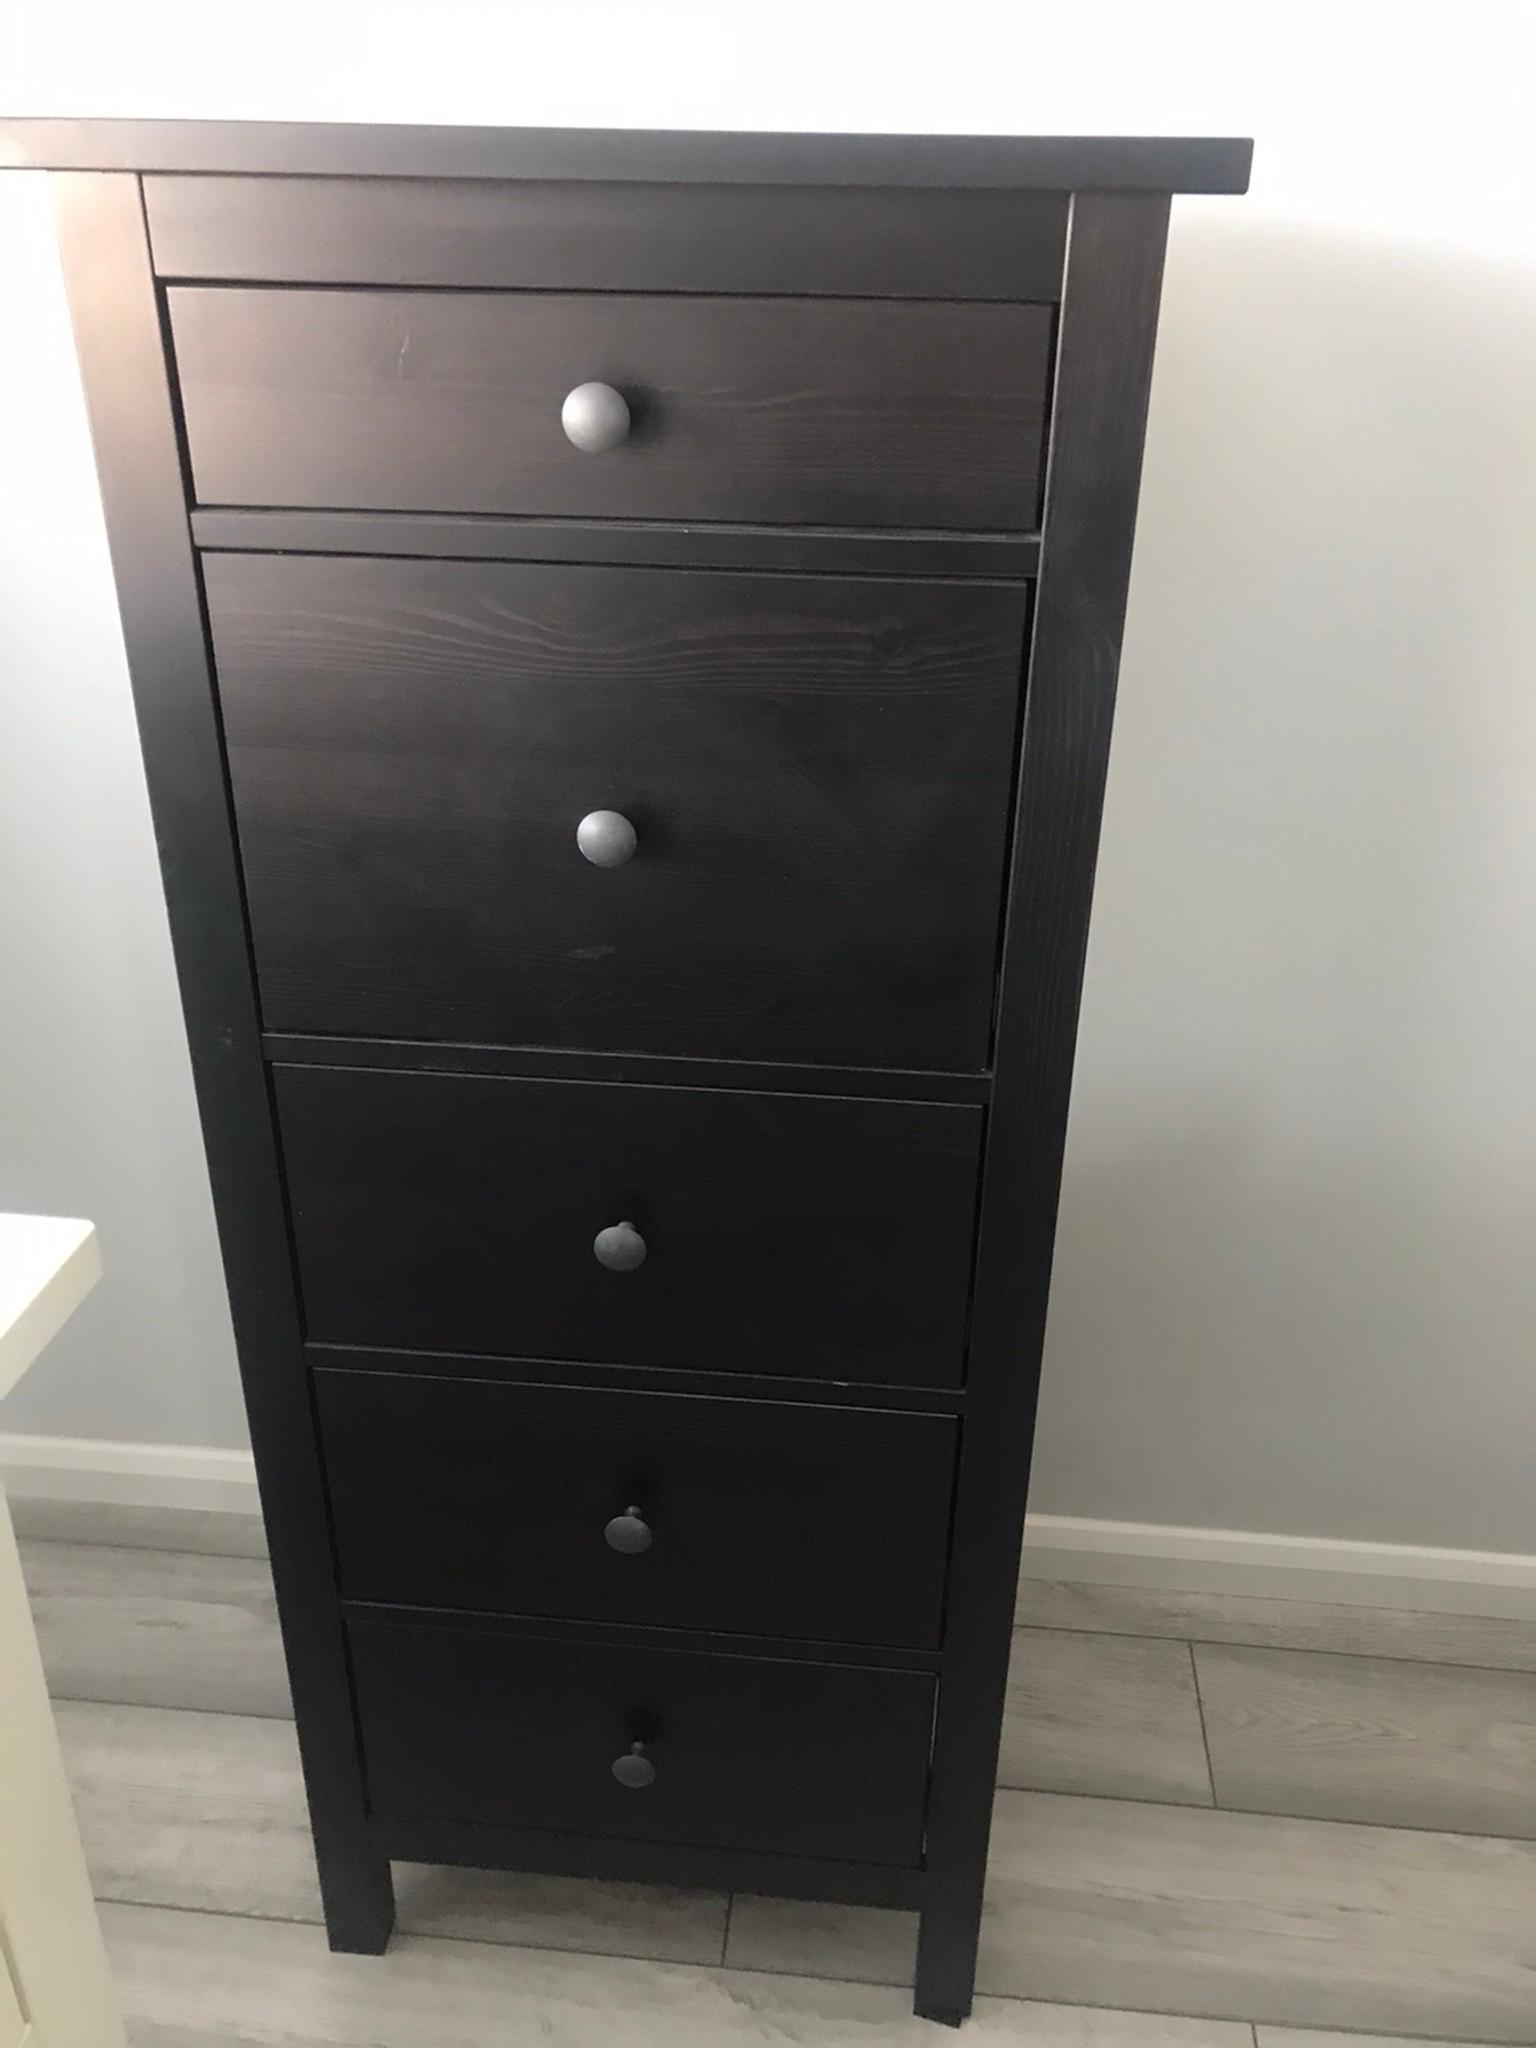 Ikea Hemnes Black Brown Tallboy In Rochester For 60 00 For Sale